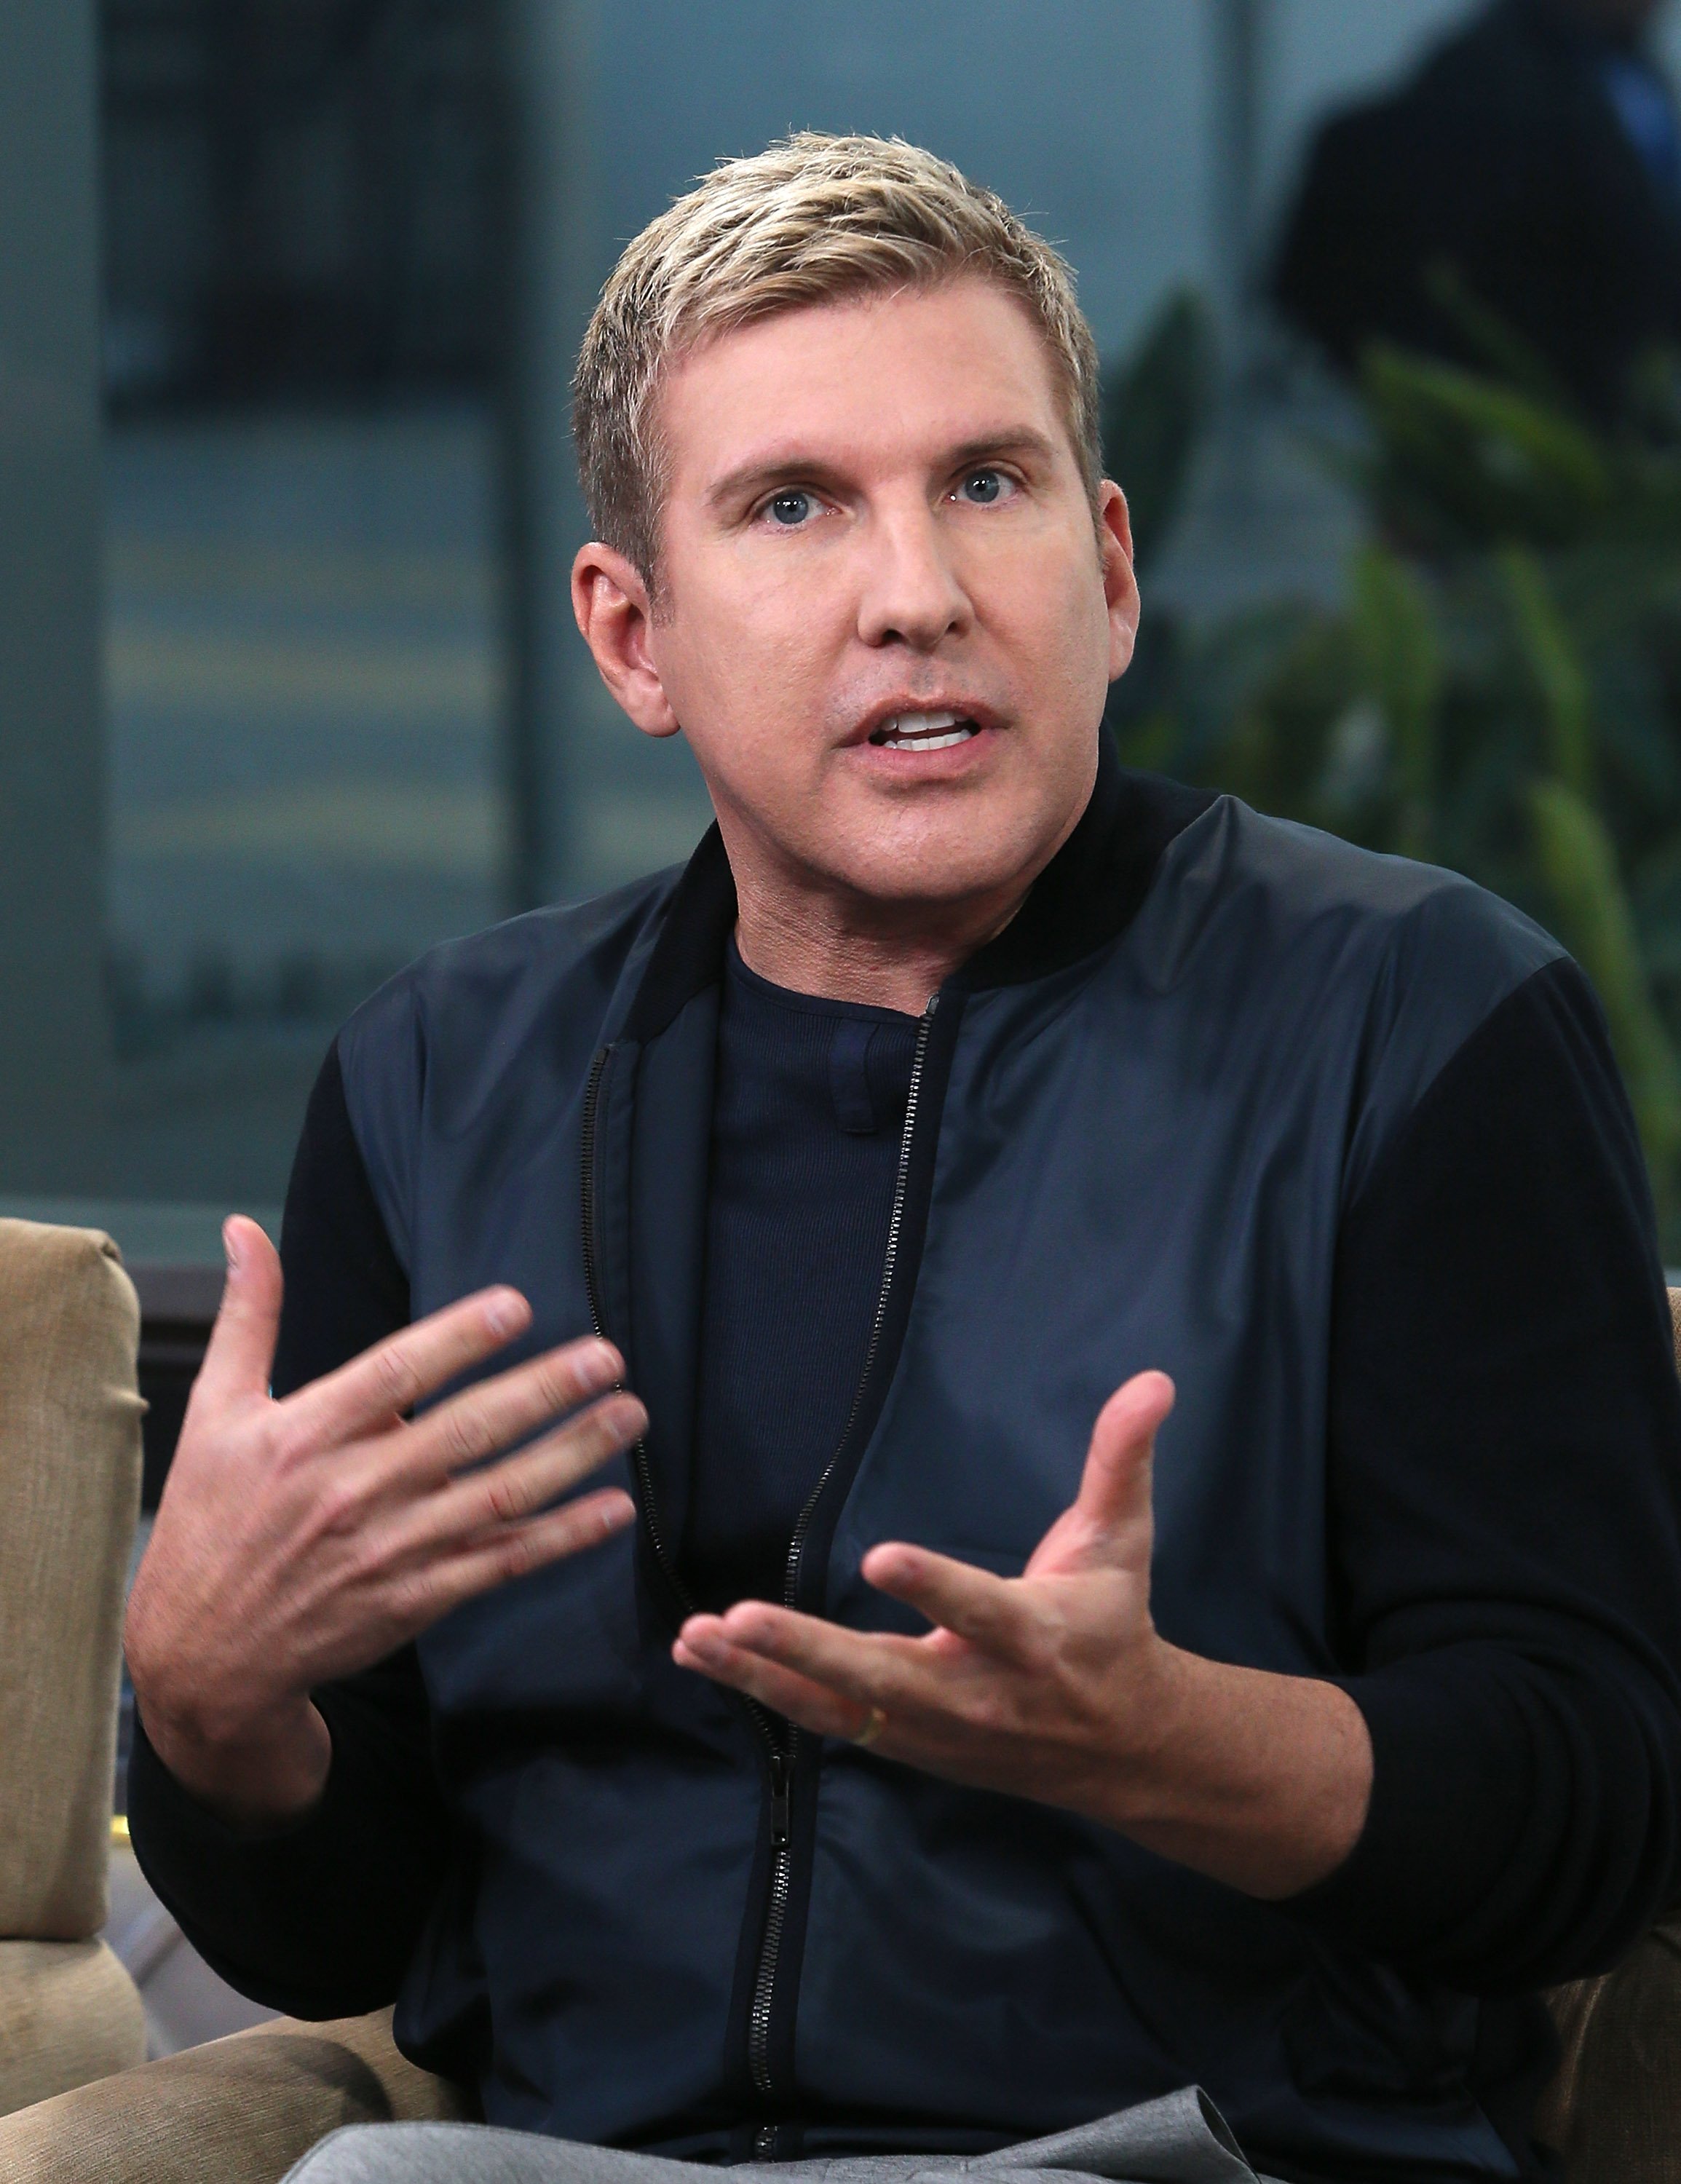 Todd Chrisley visits Hollywood Today Live at W Hollywood on February 24, 2017 in Hollywood, California | Photo: Getty Images